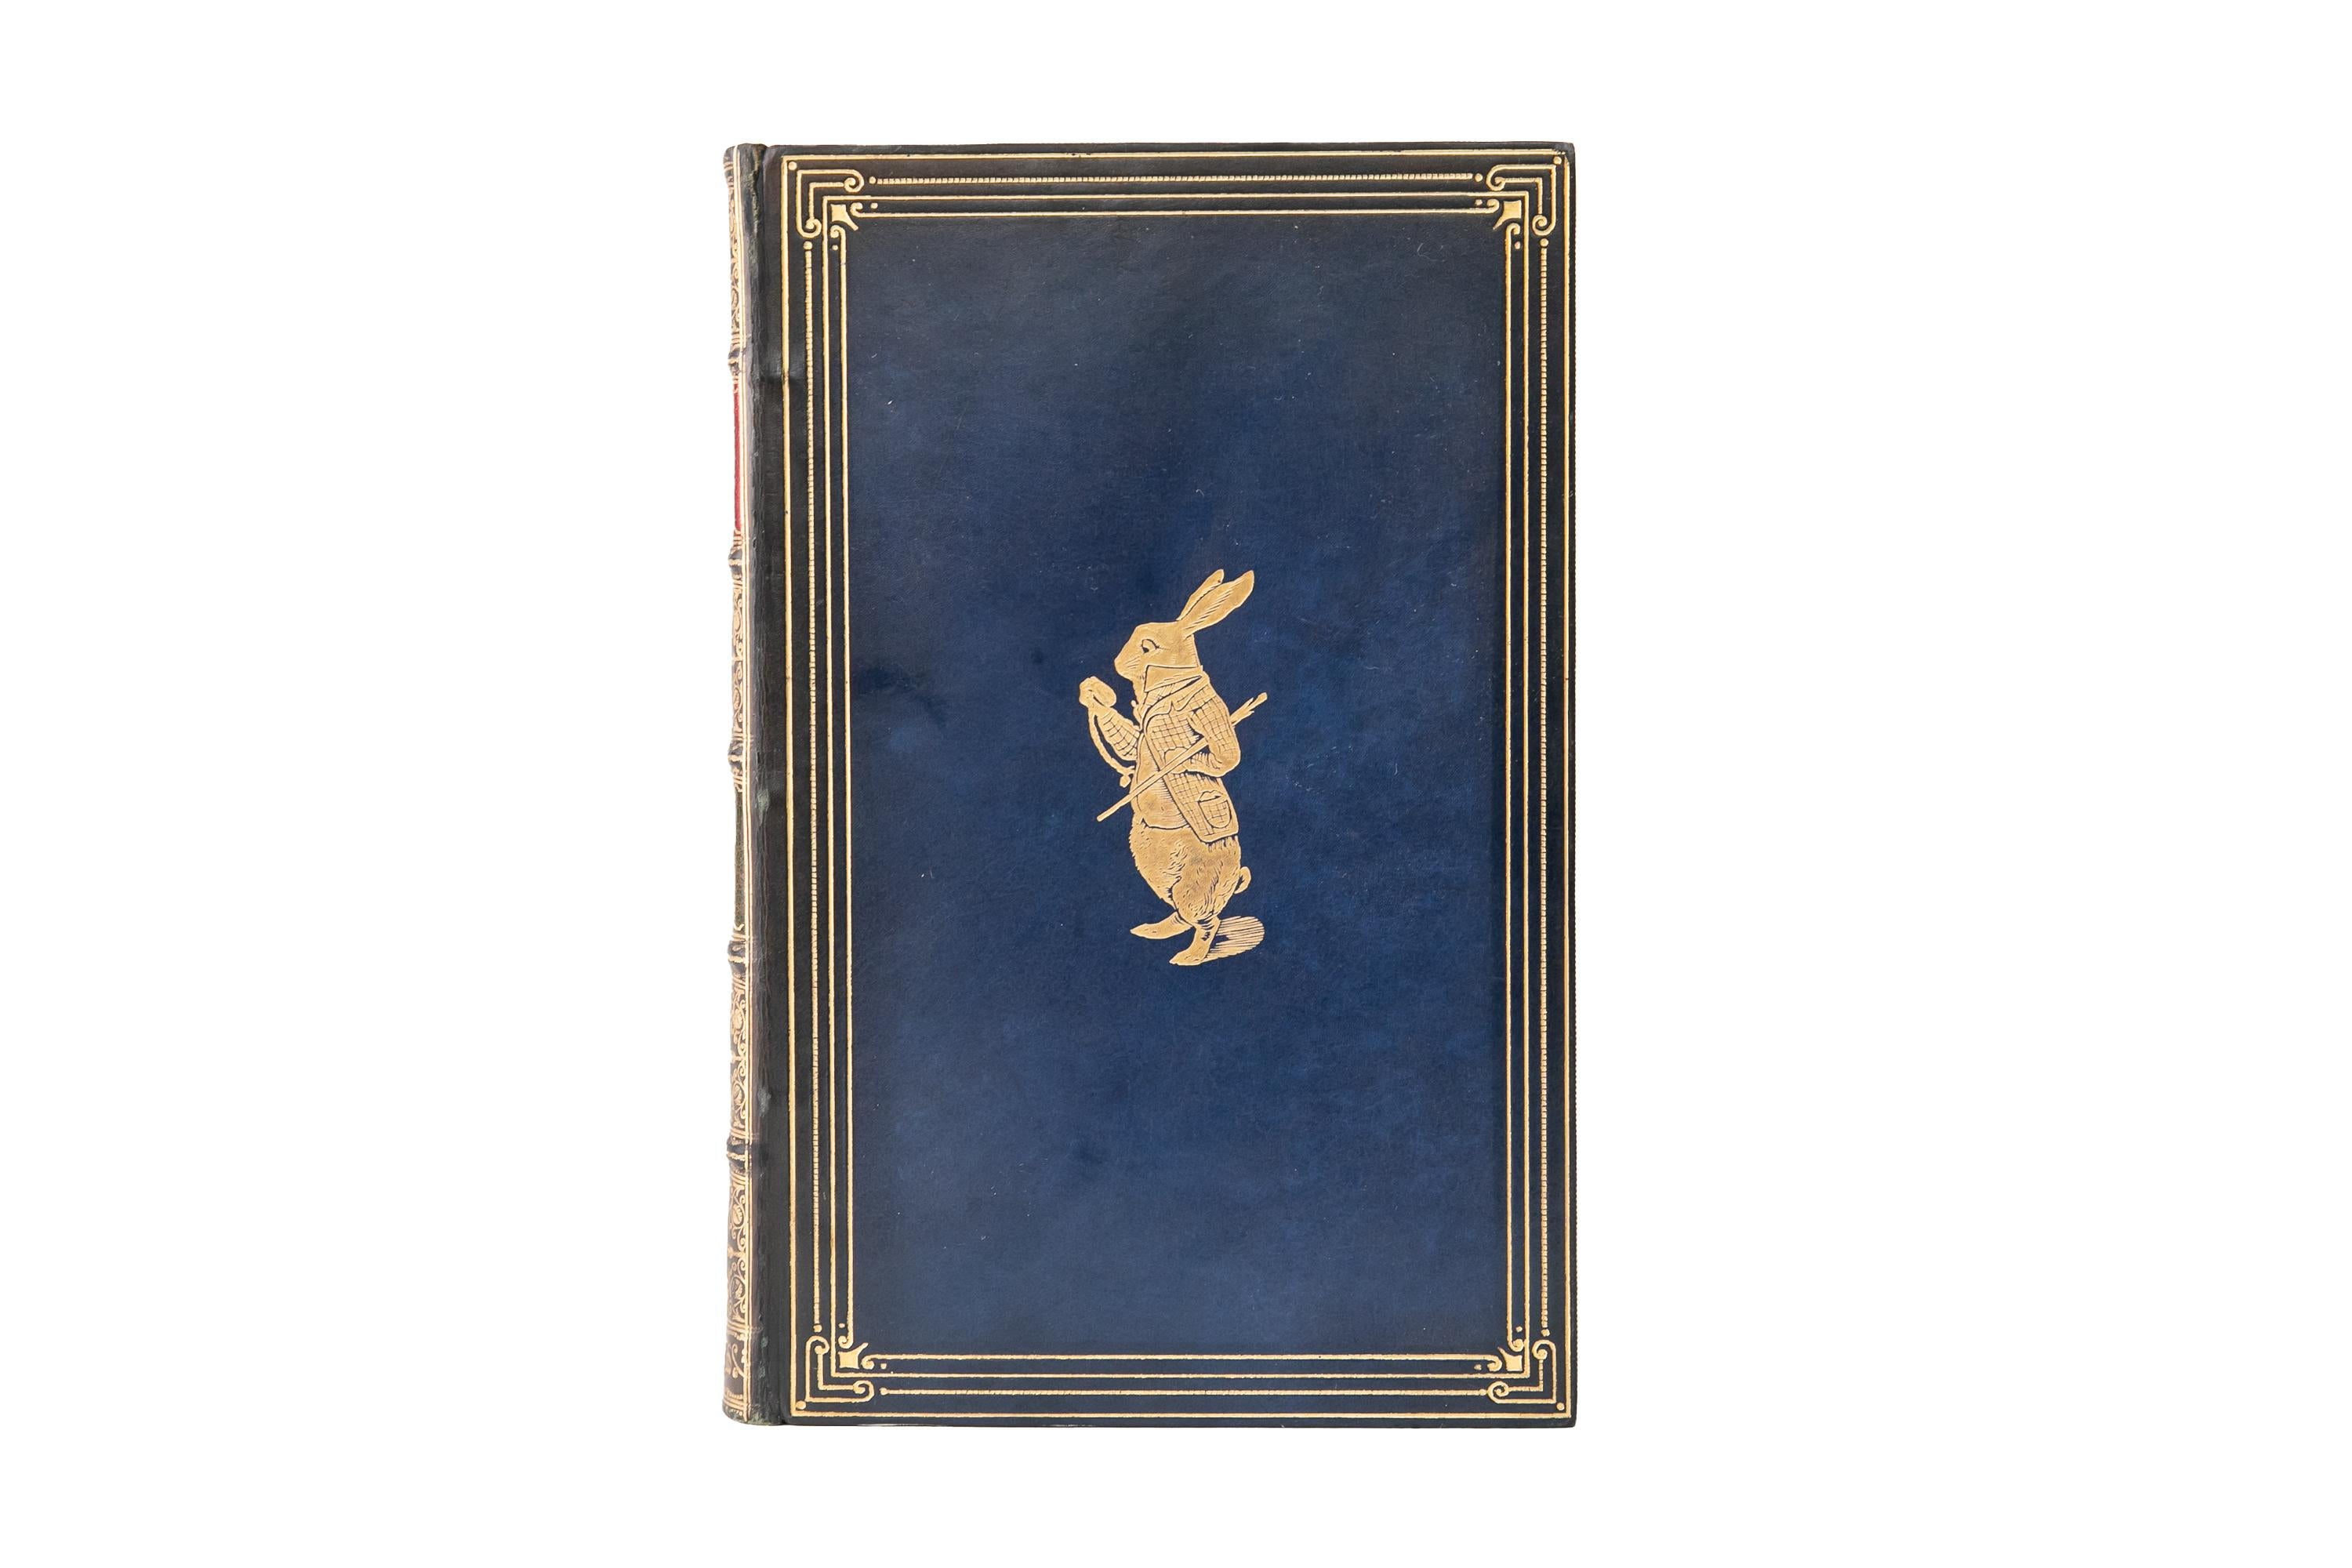 1 Volume. Lewis Carroll, Alice's Adventures in Wonderland and Through the Looking Glass. Bound by Riviere in full blue calf. Gilt-tooled detailing on the covers and raised vand spine (faded to green) with red and green morocco labels. All edges gilt